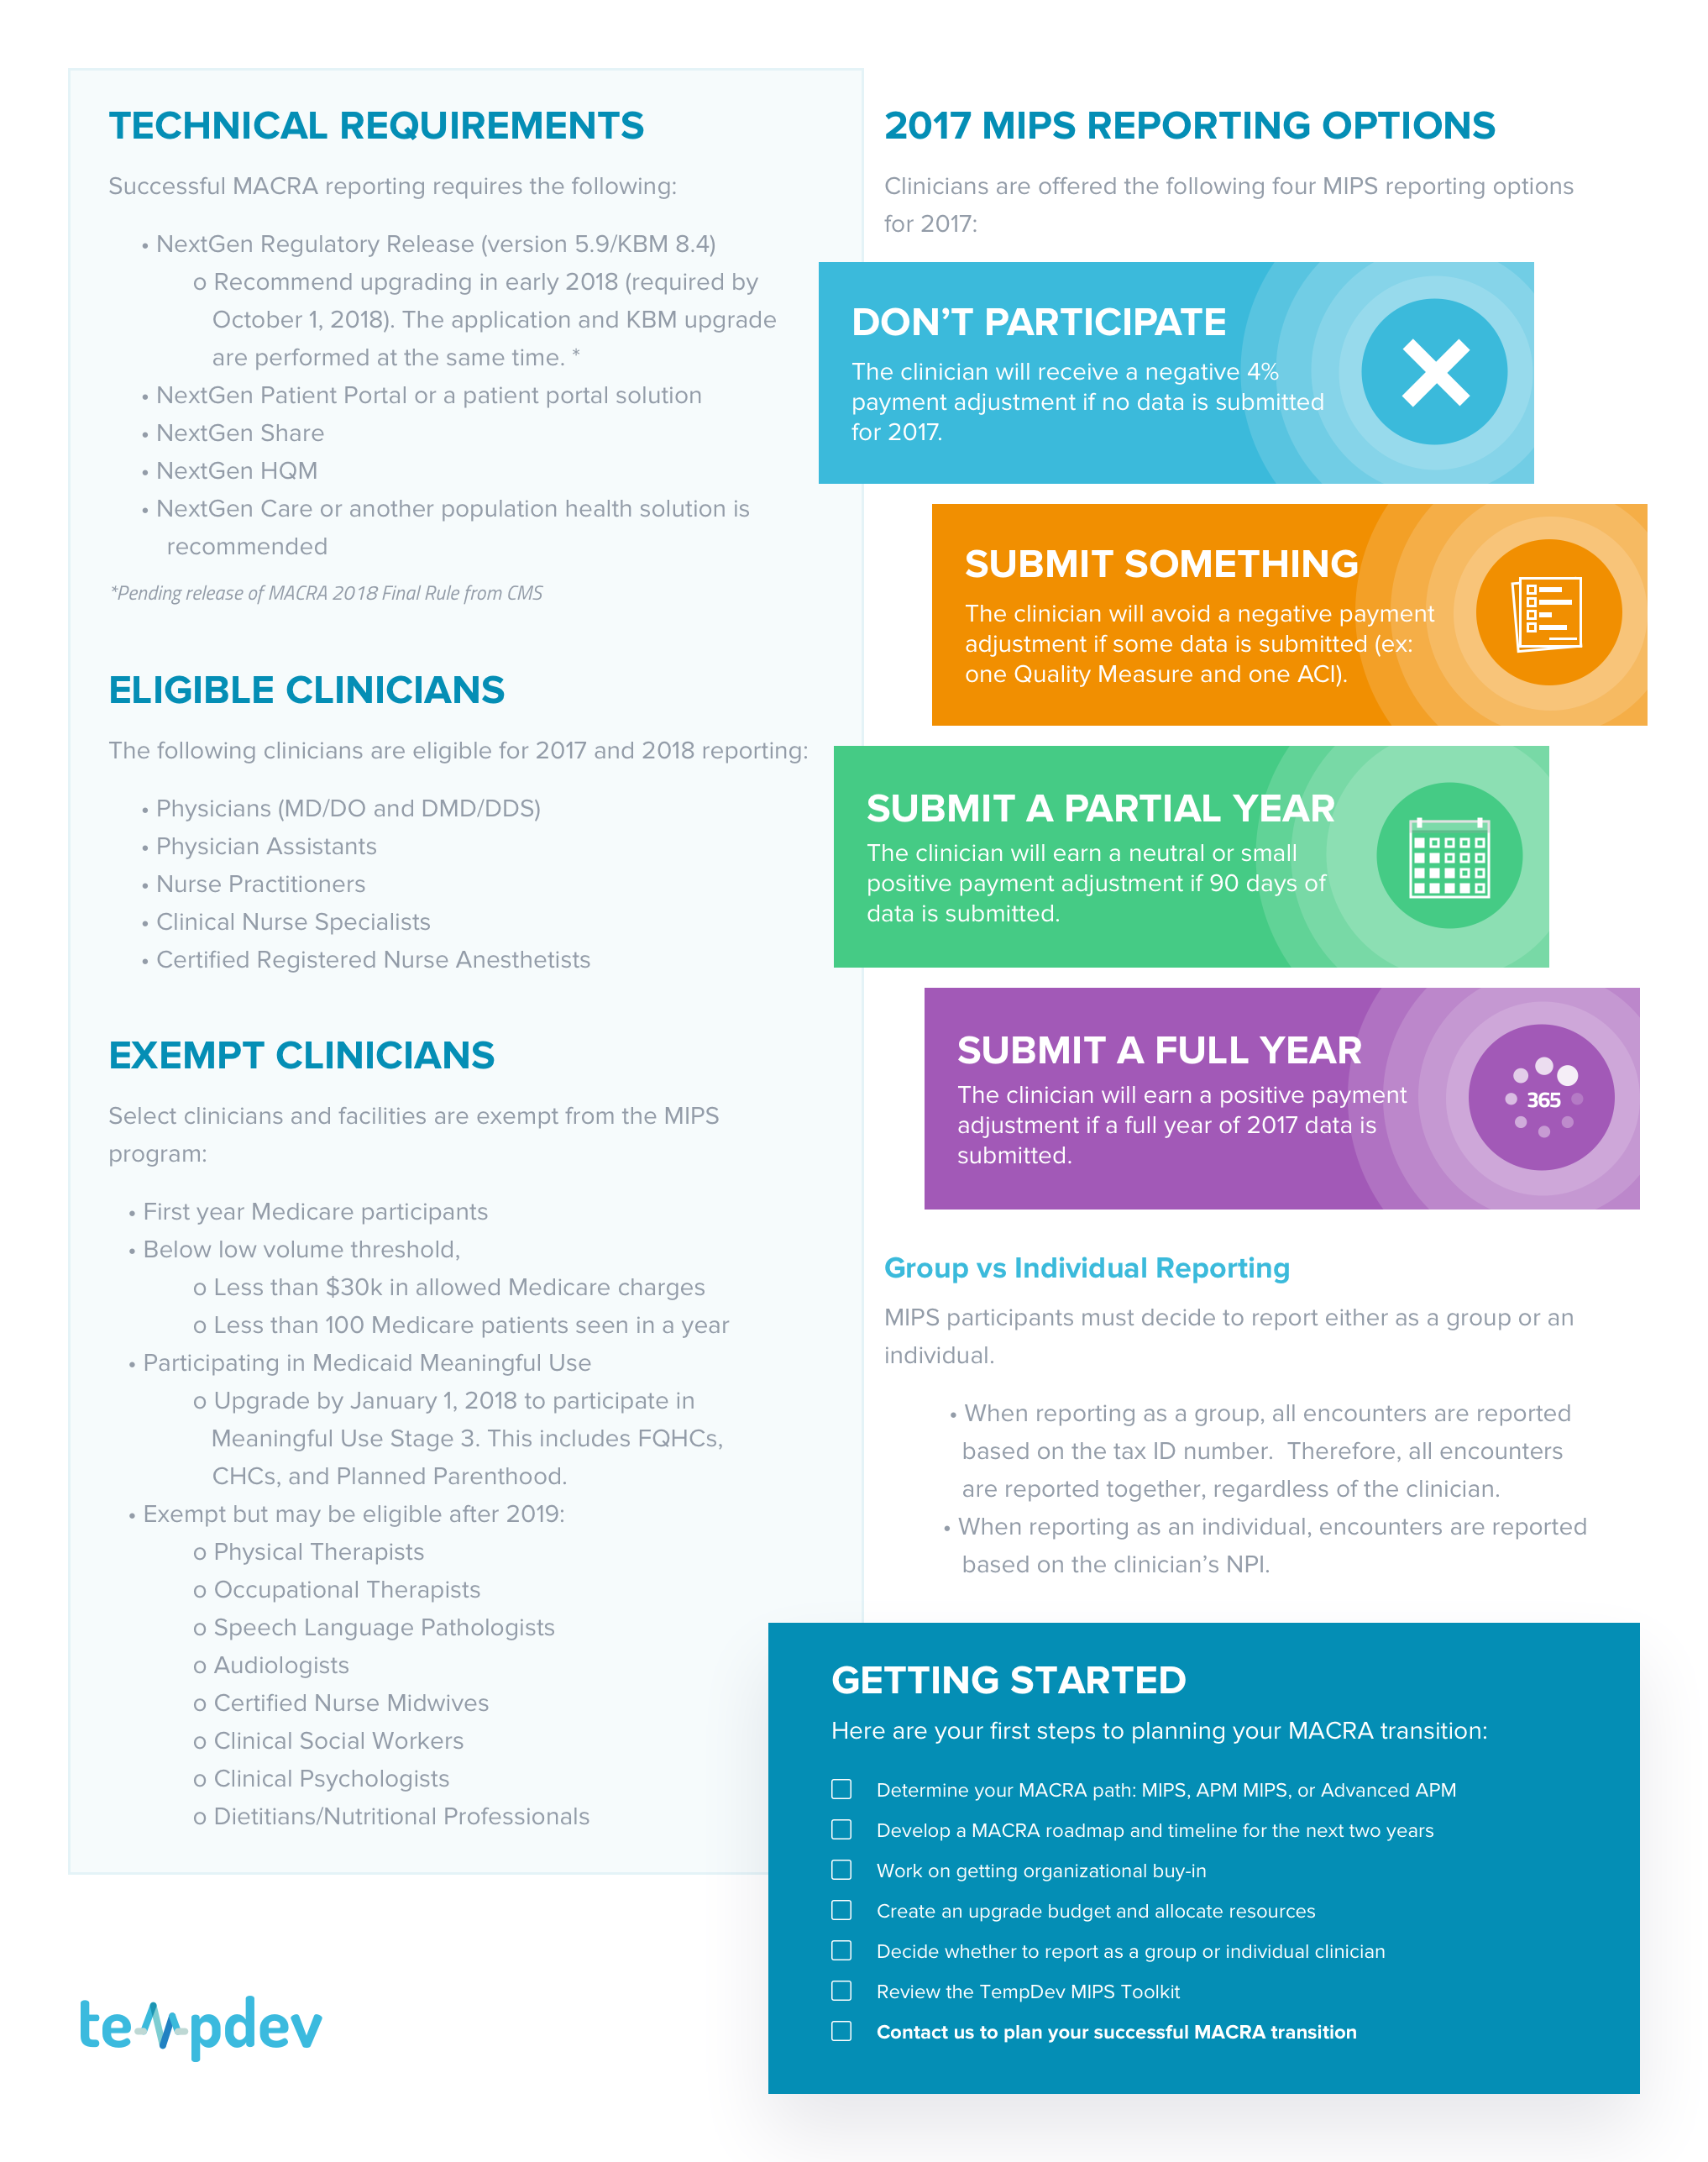 Infographic explaining 2017 MIPS reporting options